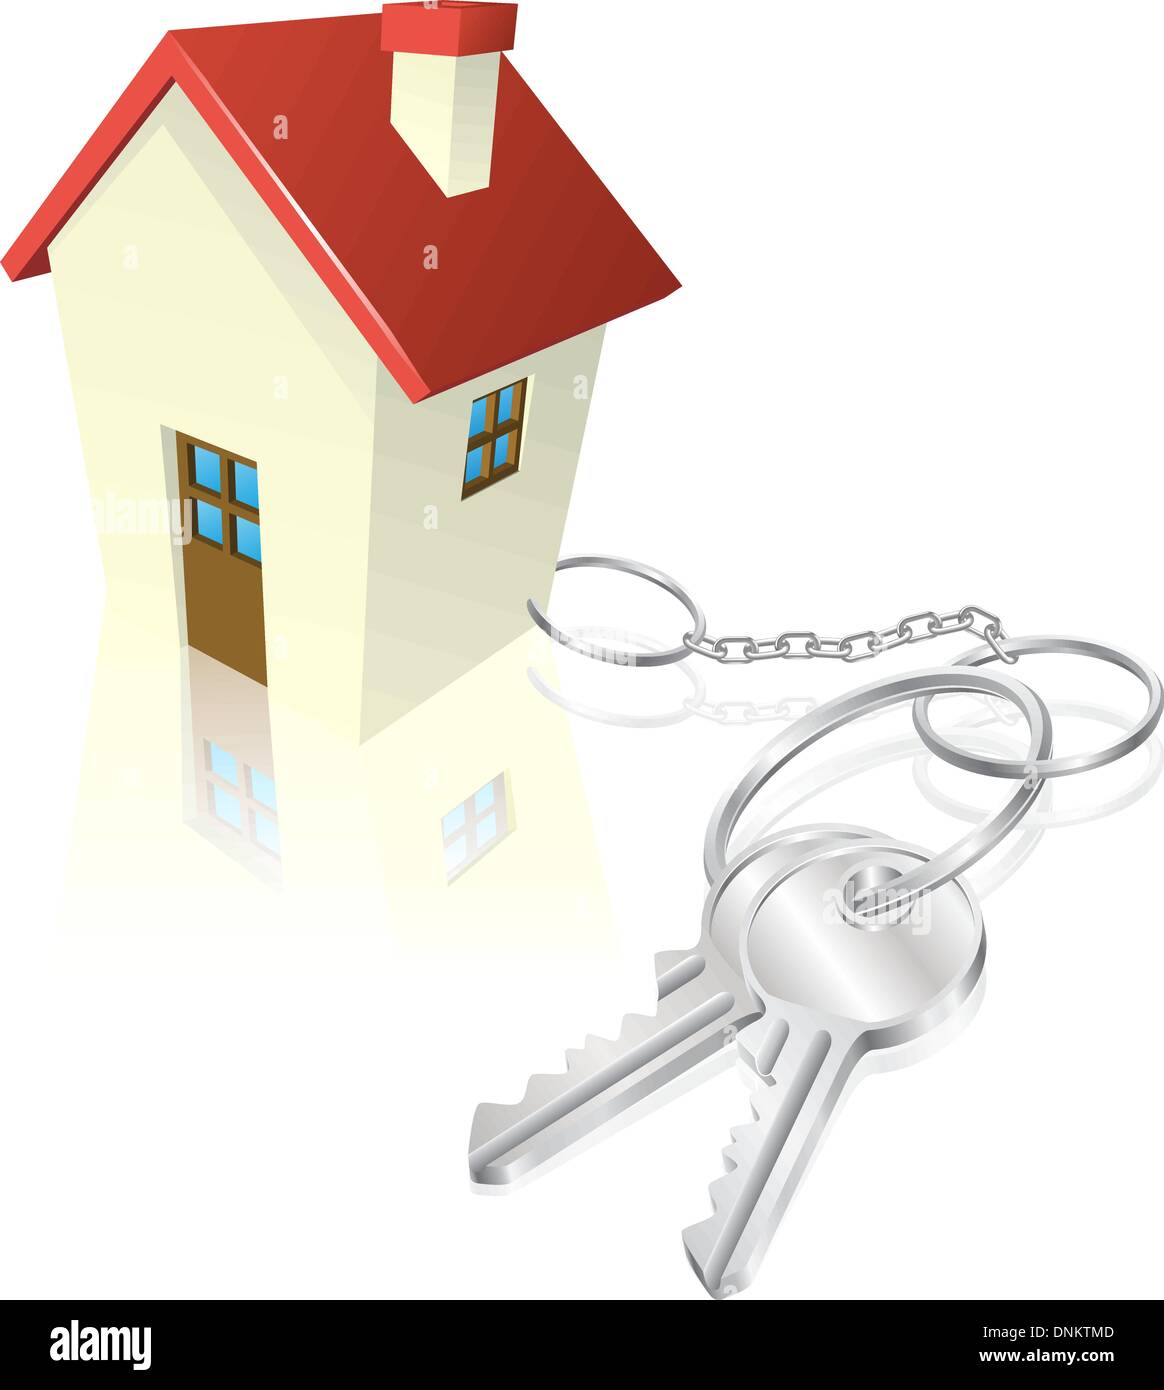 House attached to keys as keyring. Concept for new house purchase, mortgage etc. Stock Vector